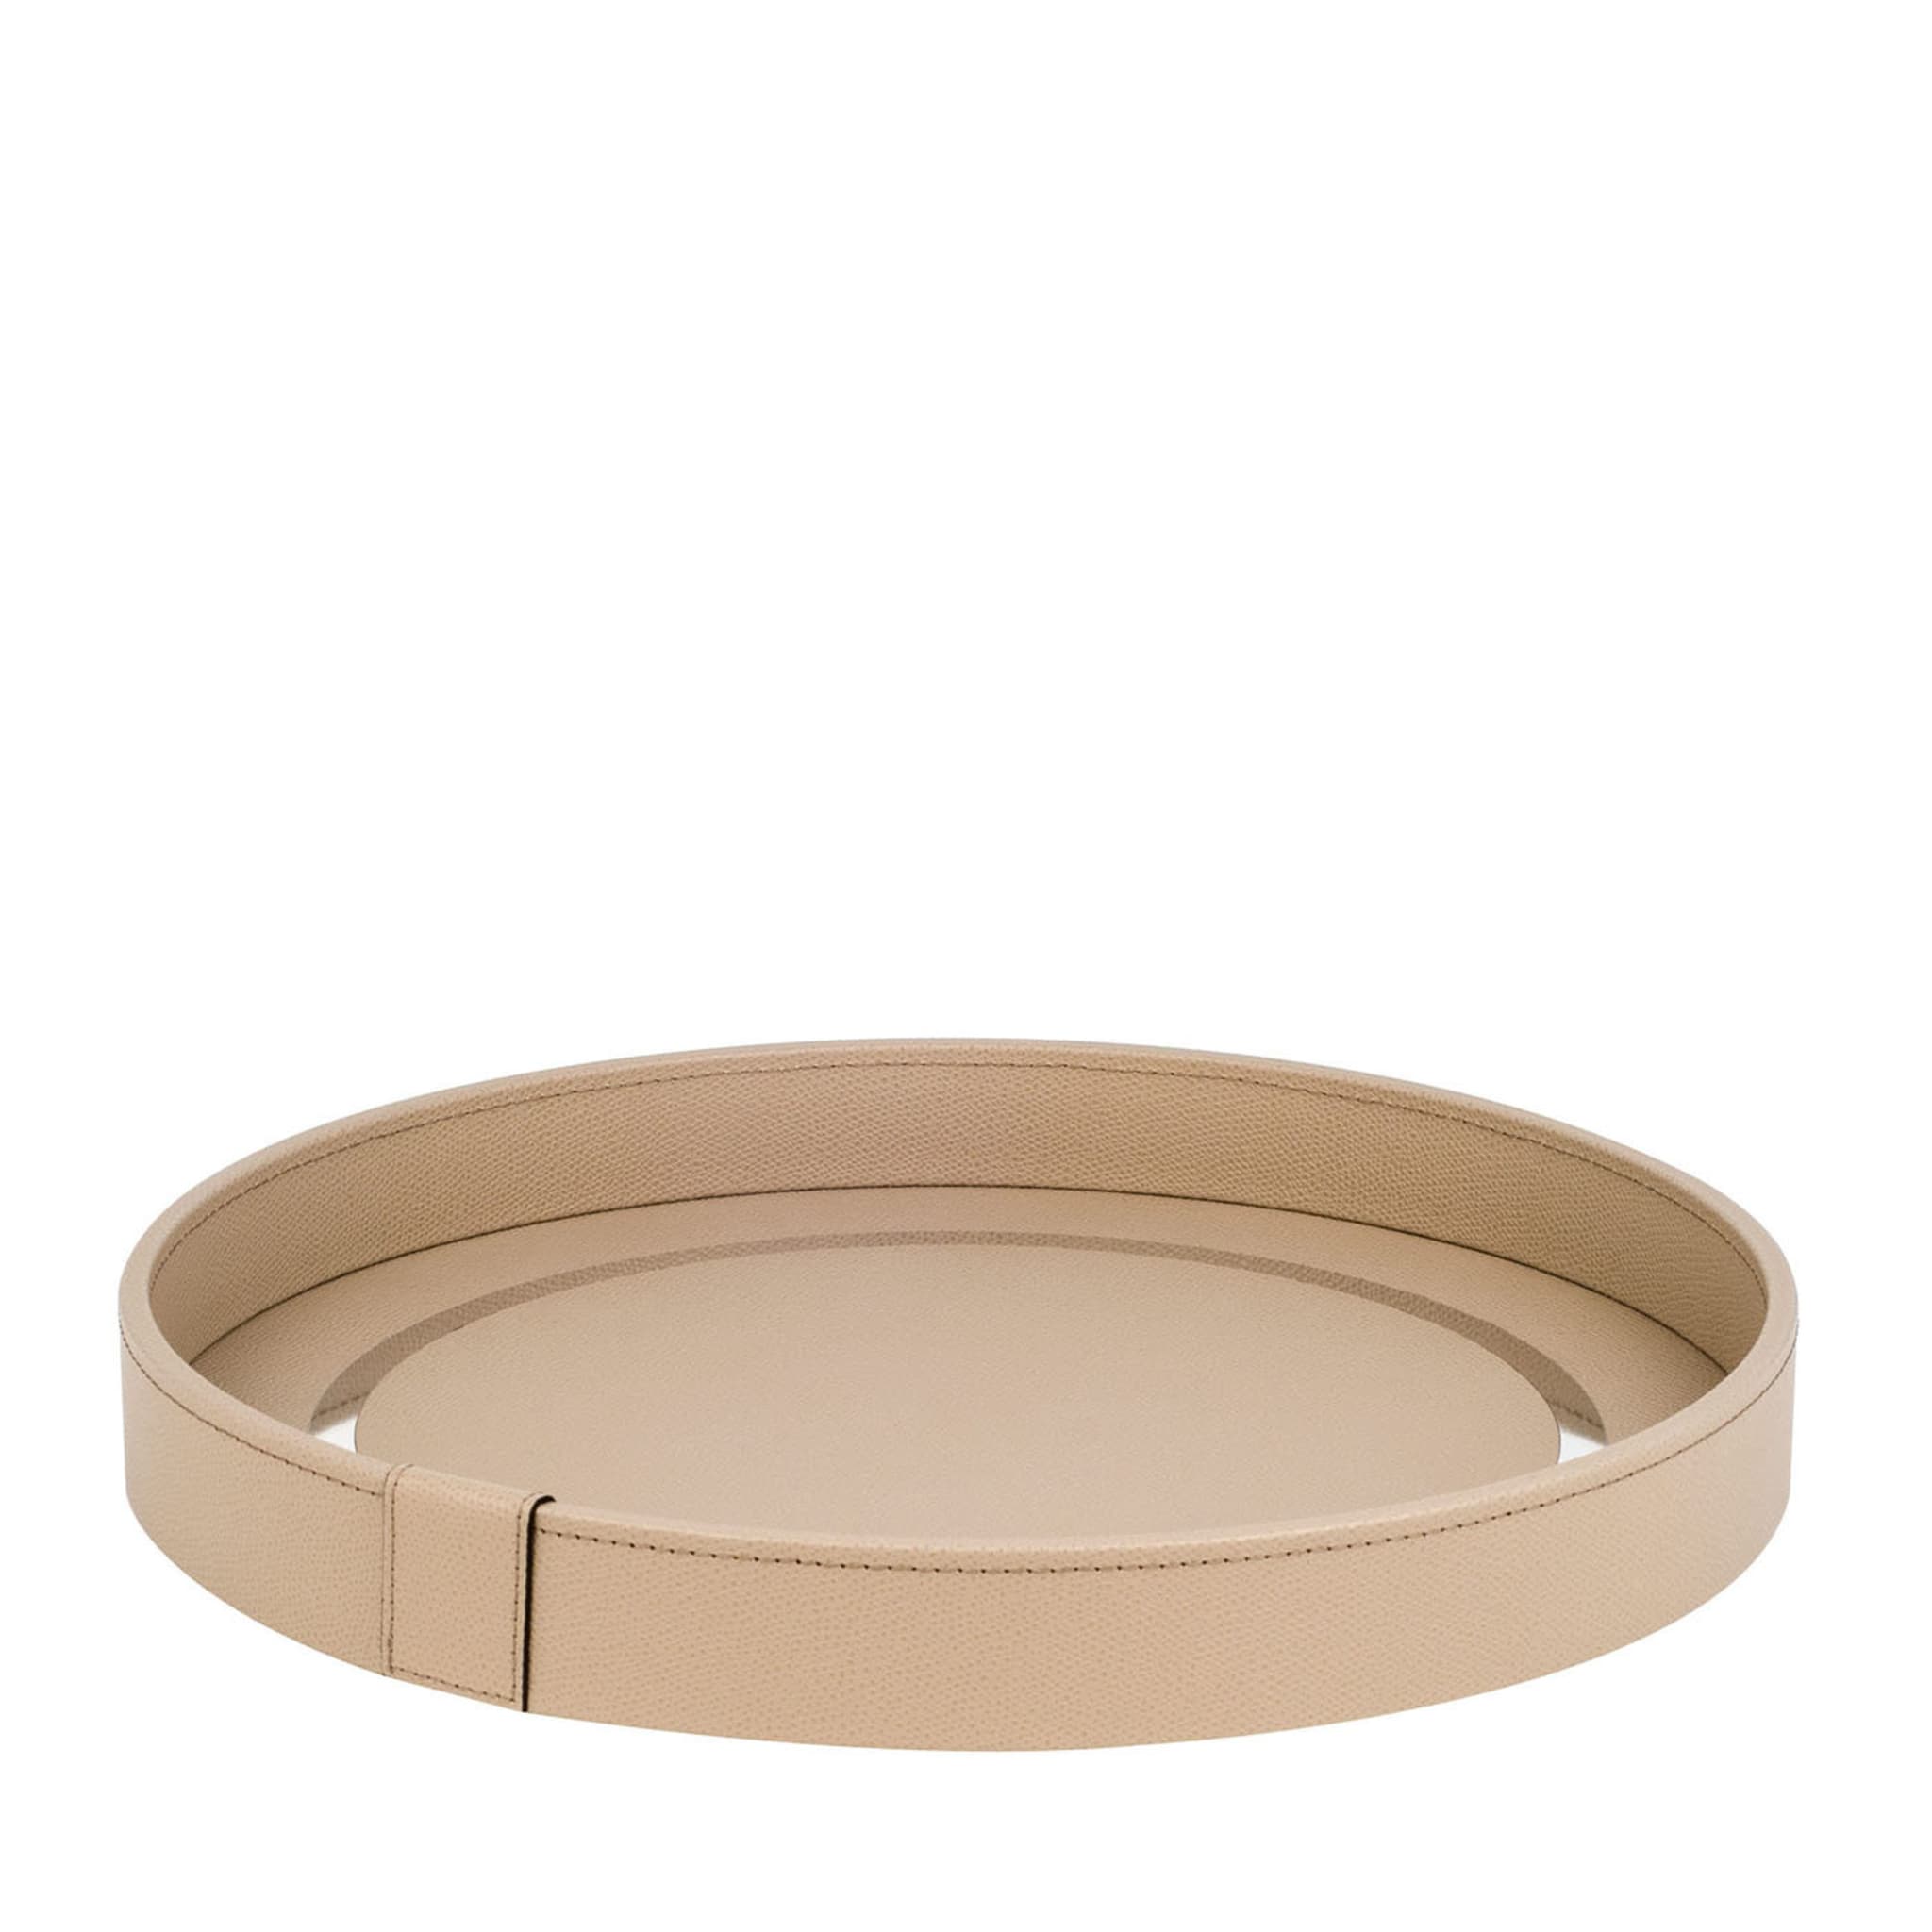 Venere Small Round Taupe Tray - Main view